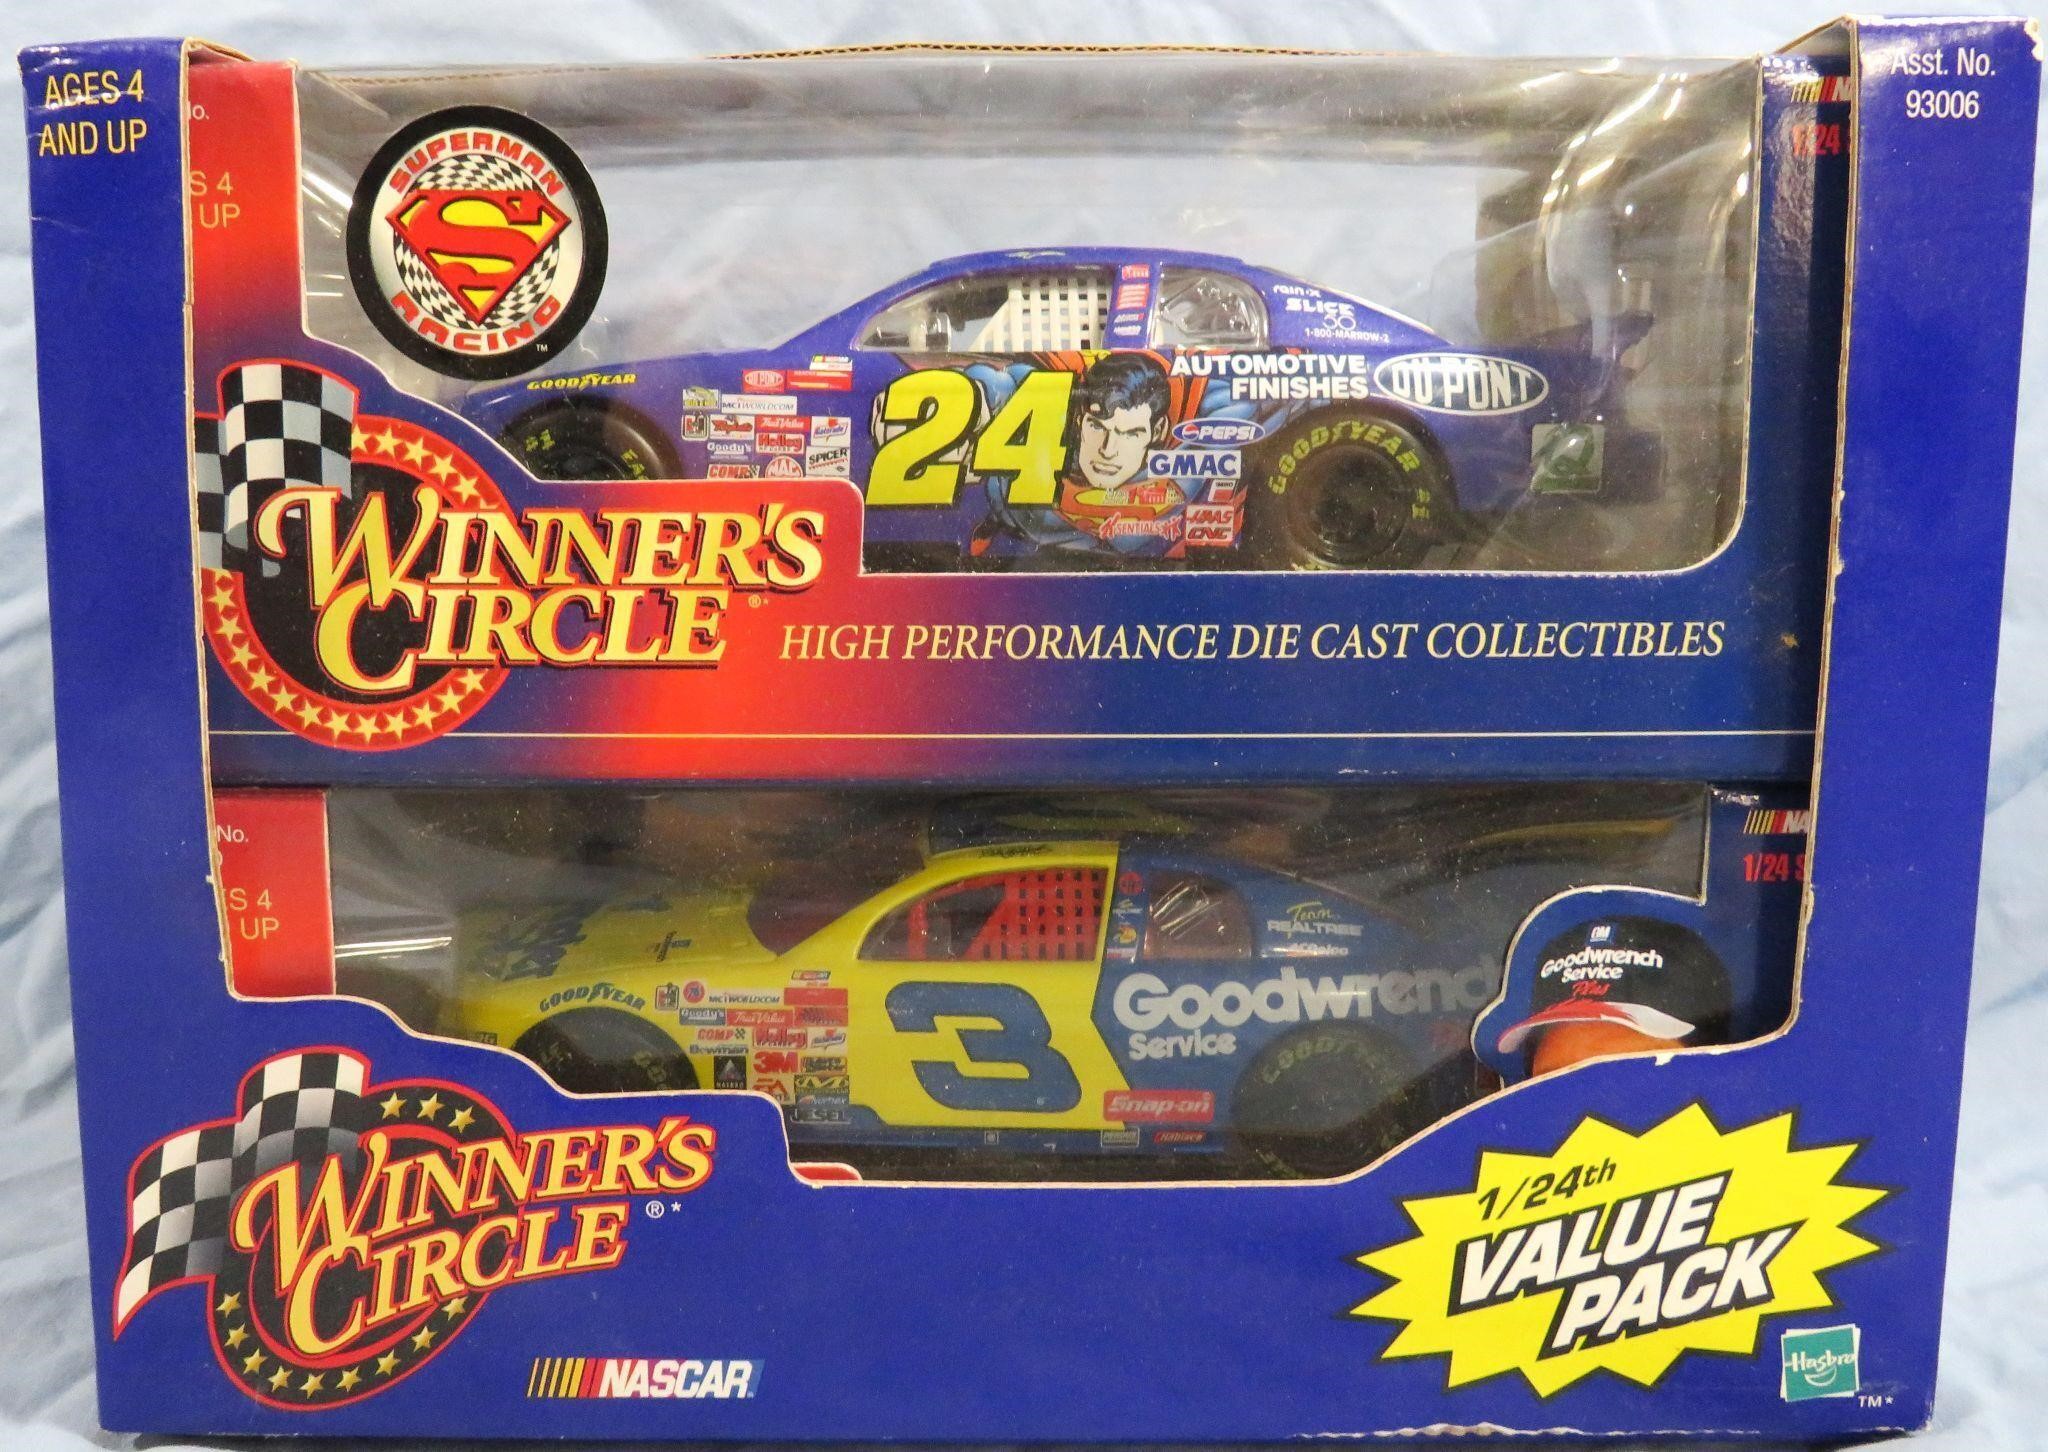 NASCAR WINNER'S CIRCLE DIECAST COLLECTIBLE CARS